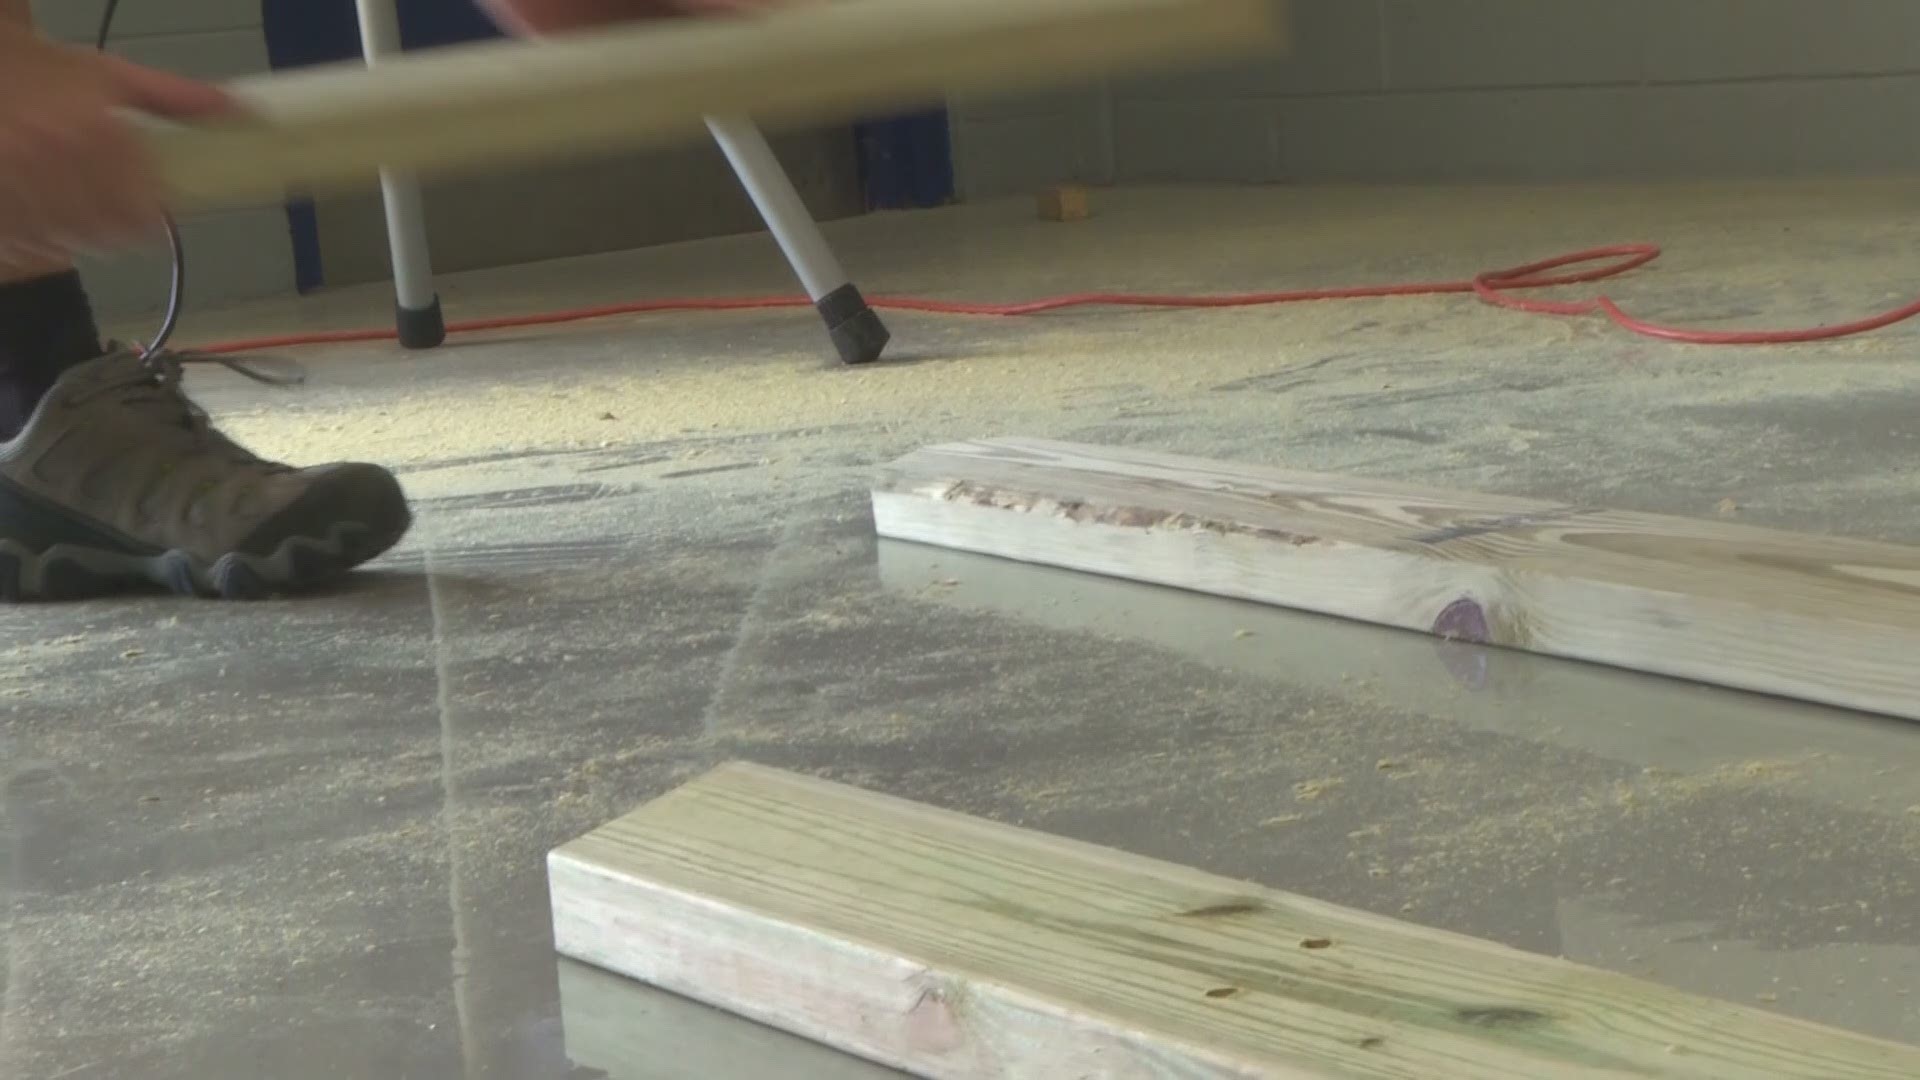 Some students and staff at Wendell Krinn Technical High School in Pasco County are getting creative. They're creating picnic tables so that classes can go outdoors.